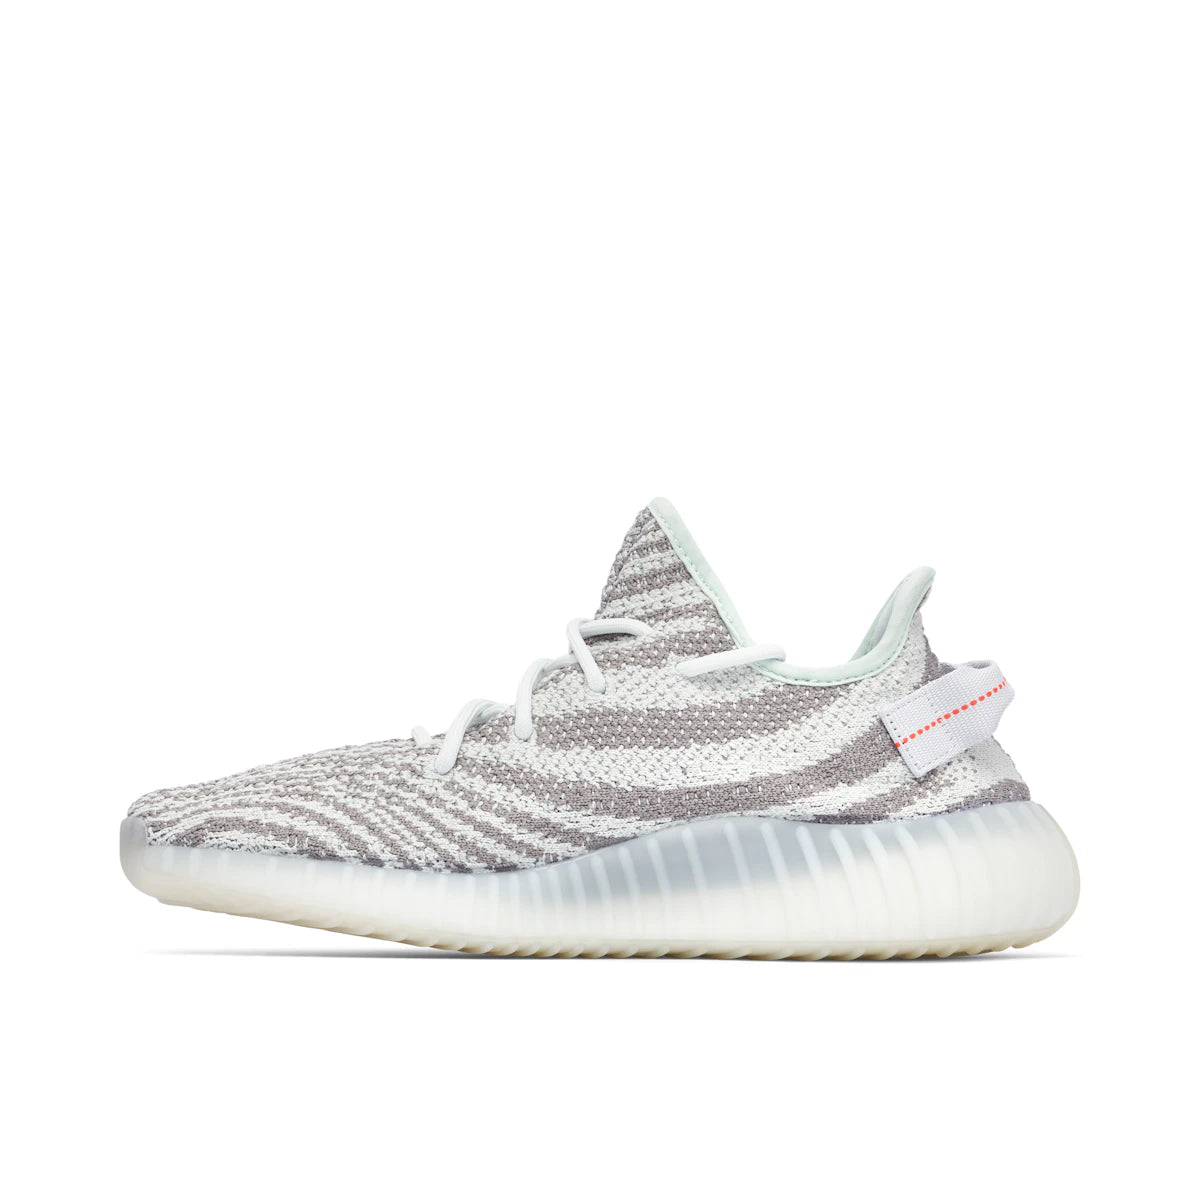 adidas Yeezy Boost 350 V2 Blue Tint by Yeezy from £265.99